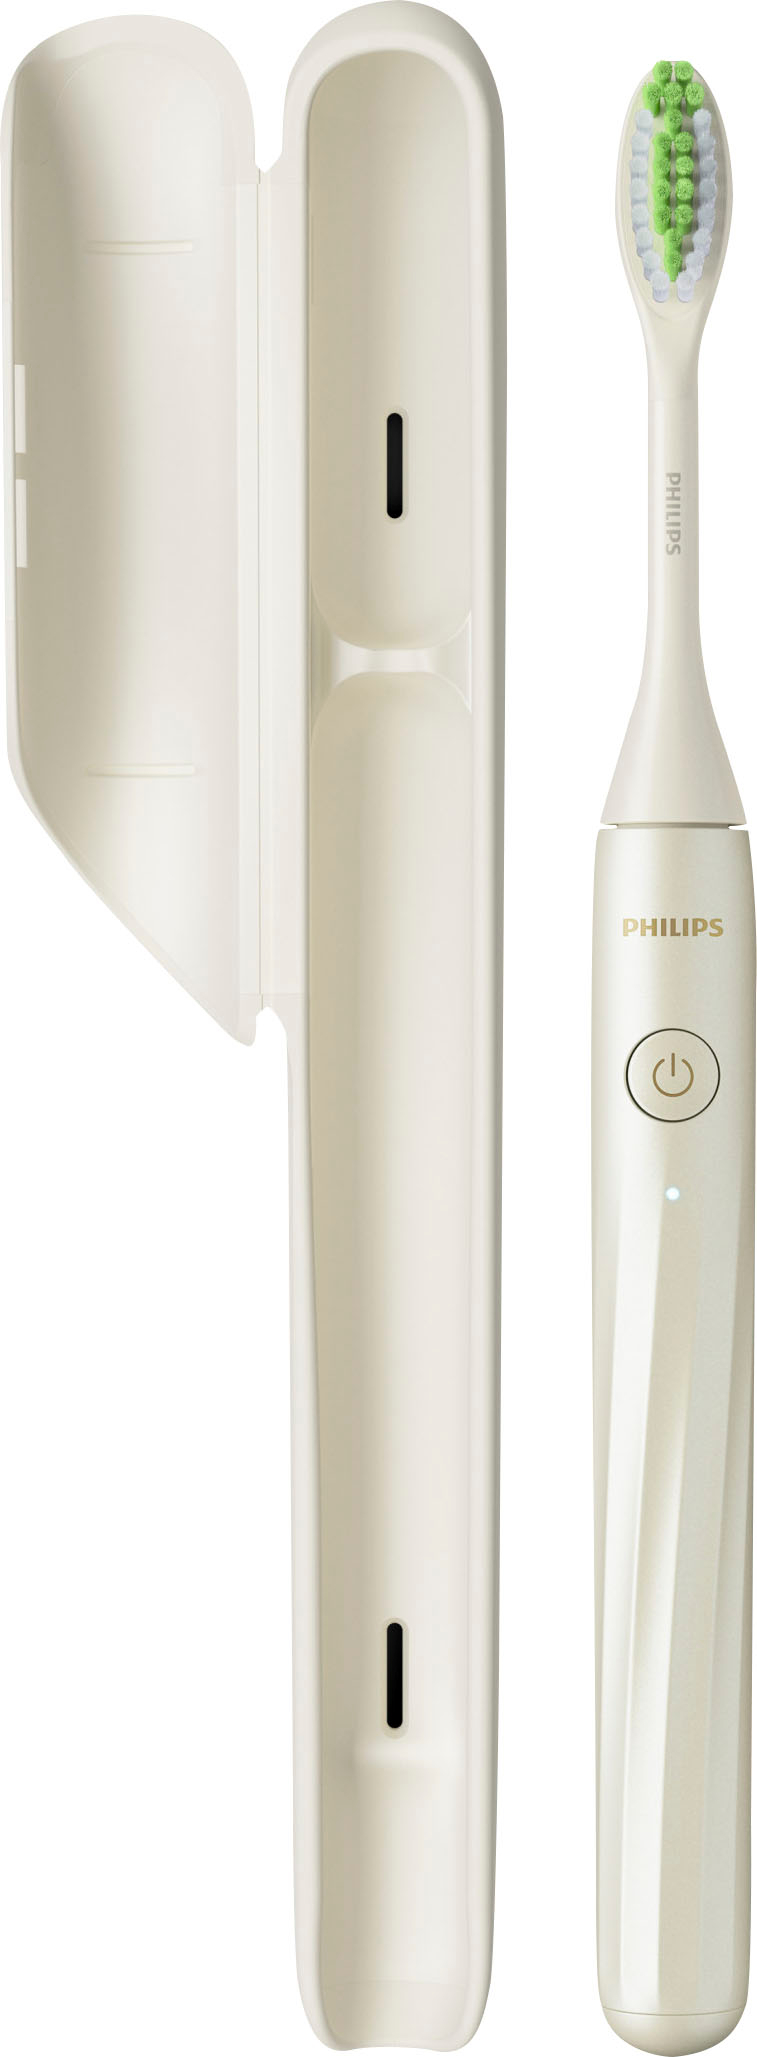 Philips One Power Toothbrush, Rechargeable